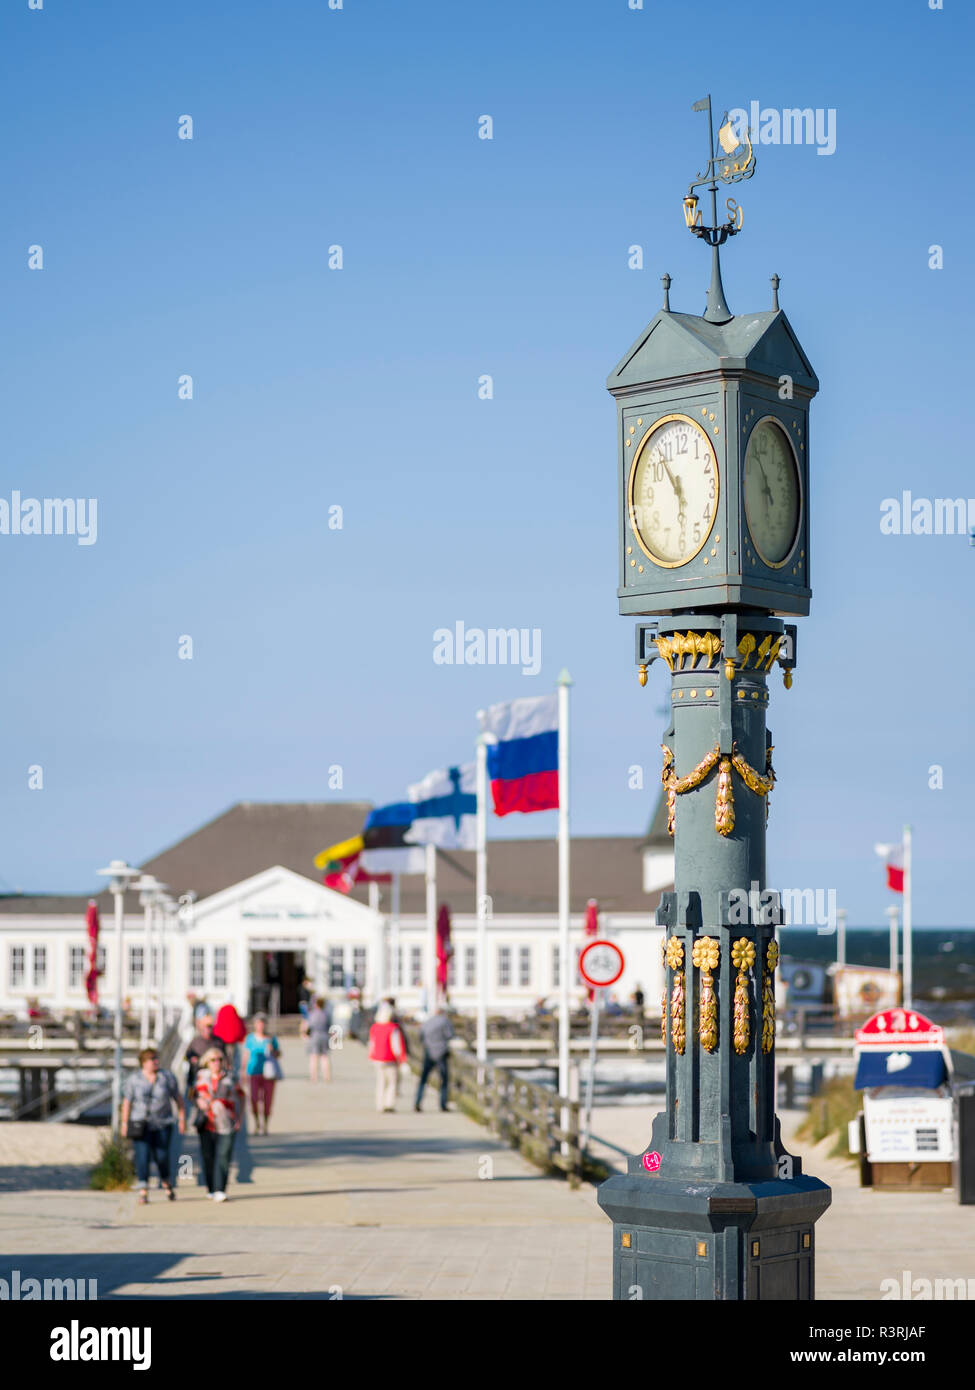 Art Nouveau Clock At The Famous Pier In Ahlbeck On The Island Of Usedom. Germany, Mecklenburg-Western Pomerania Stock Photo